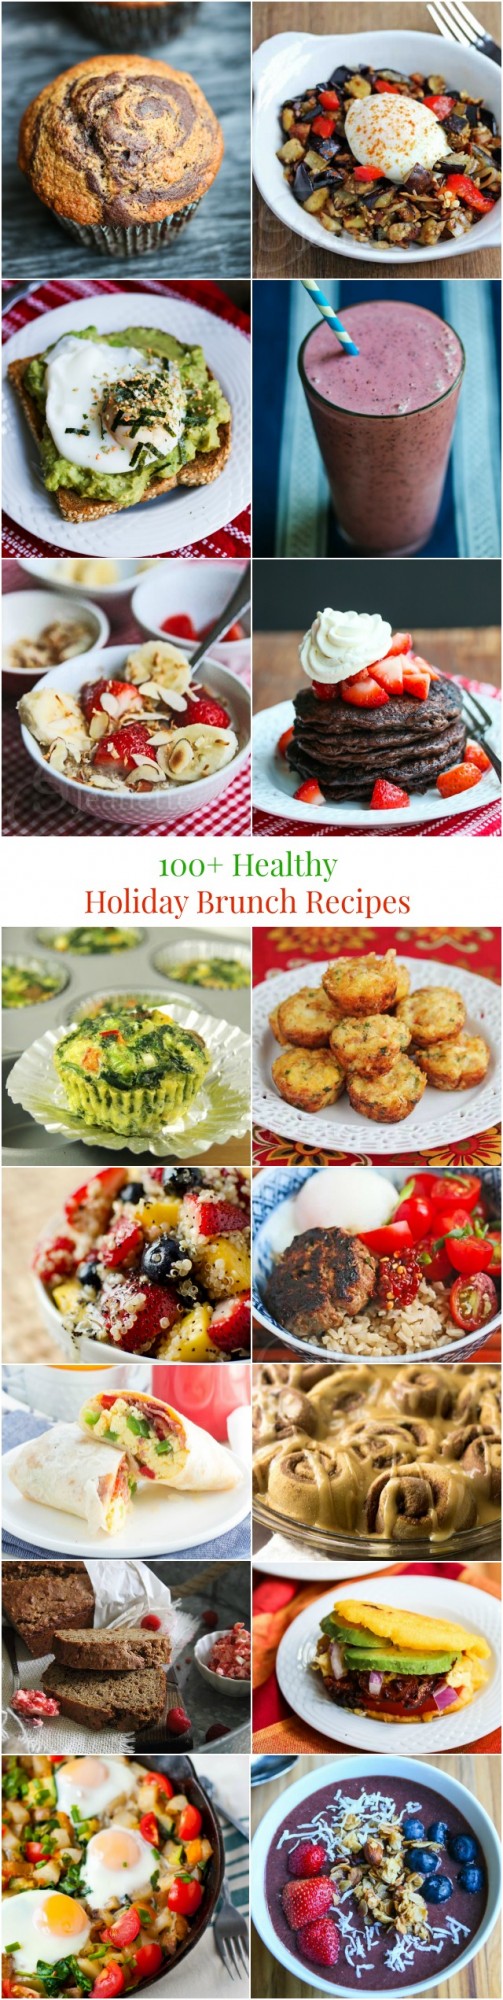 100+ Healthy Holiday Breakfast and Brunch Recipes - Pin this to save this HUGE collection of brunch recipes...pancakes, french toast, breakfast casseroles, hashes, international breakfast foods, smoothies and more!